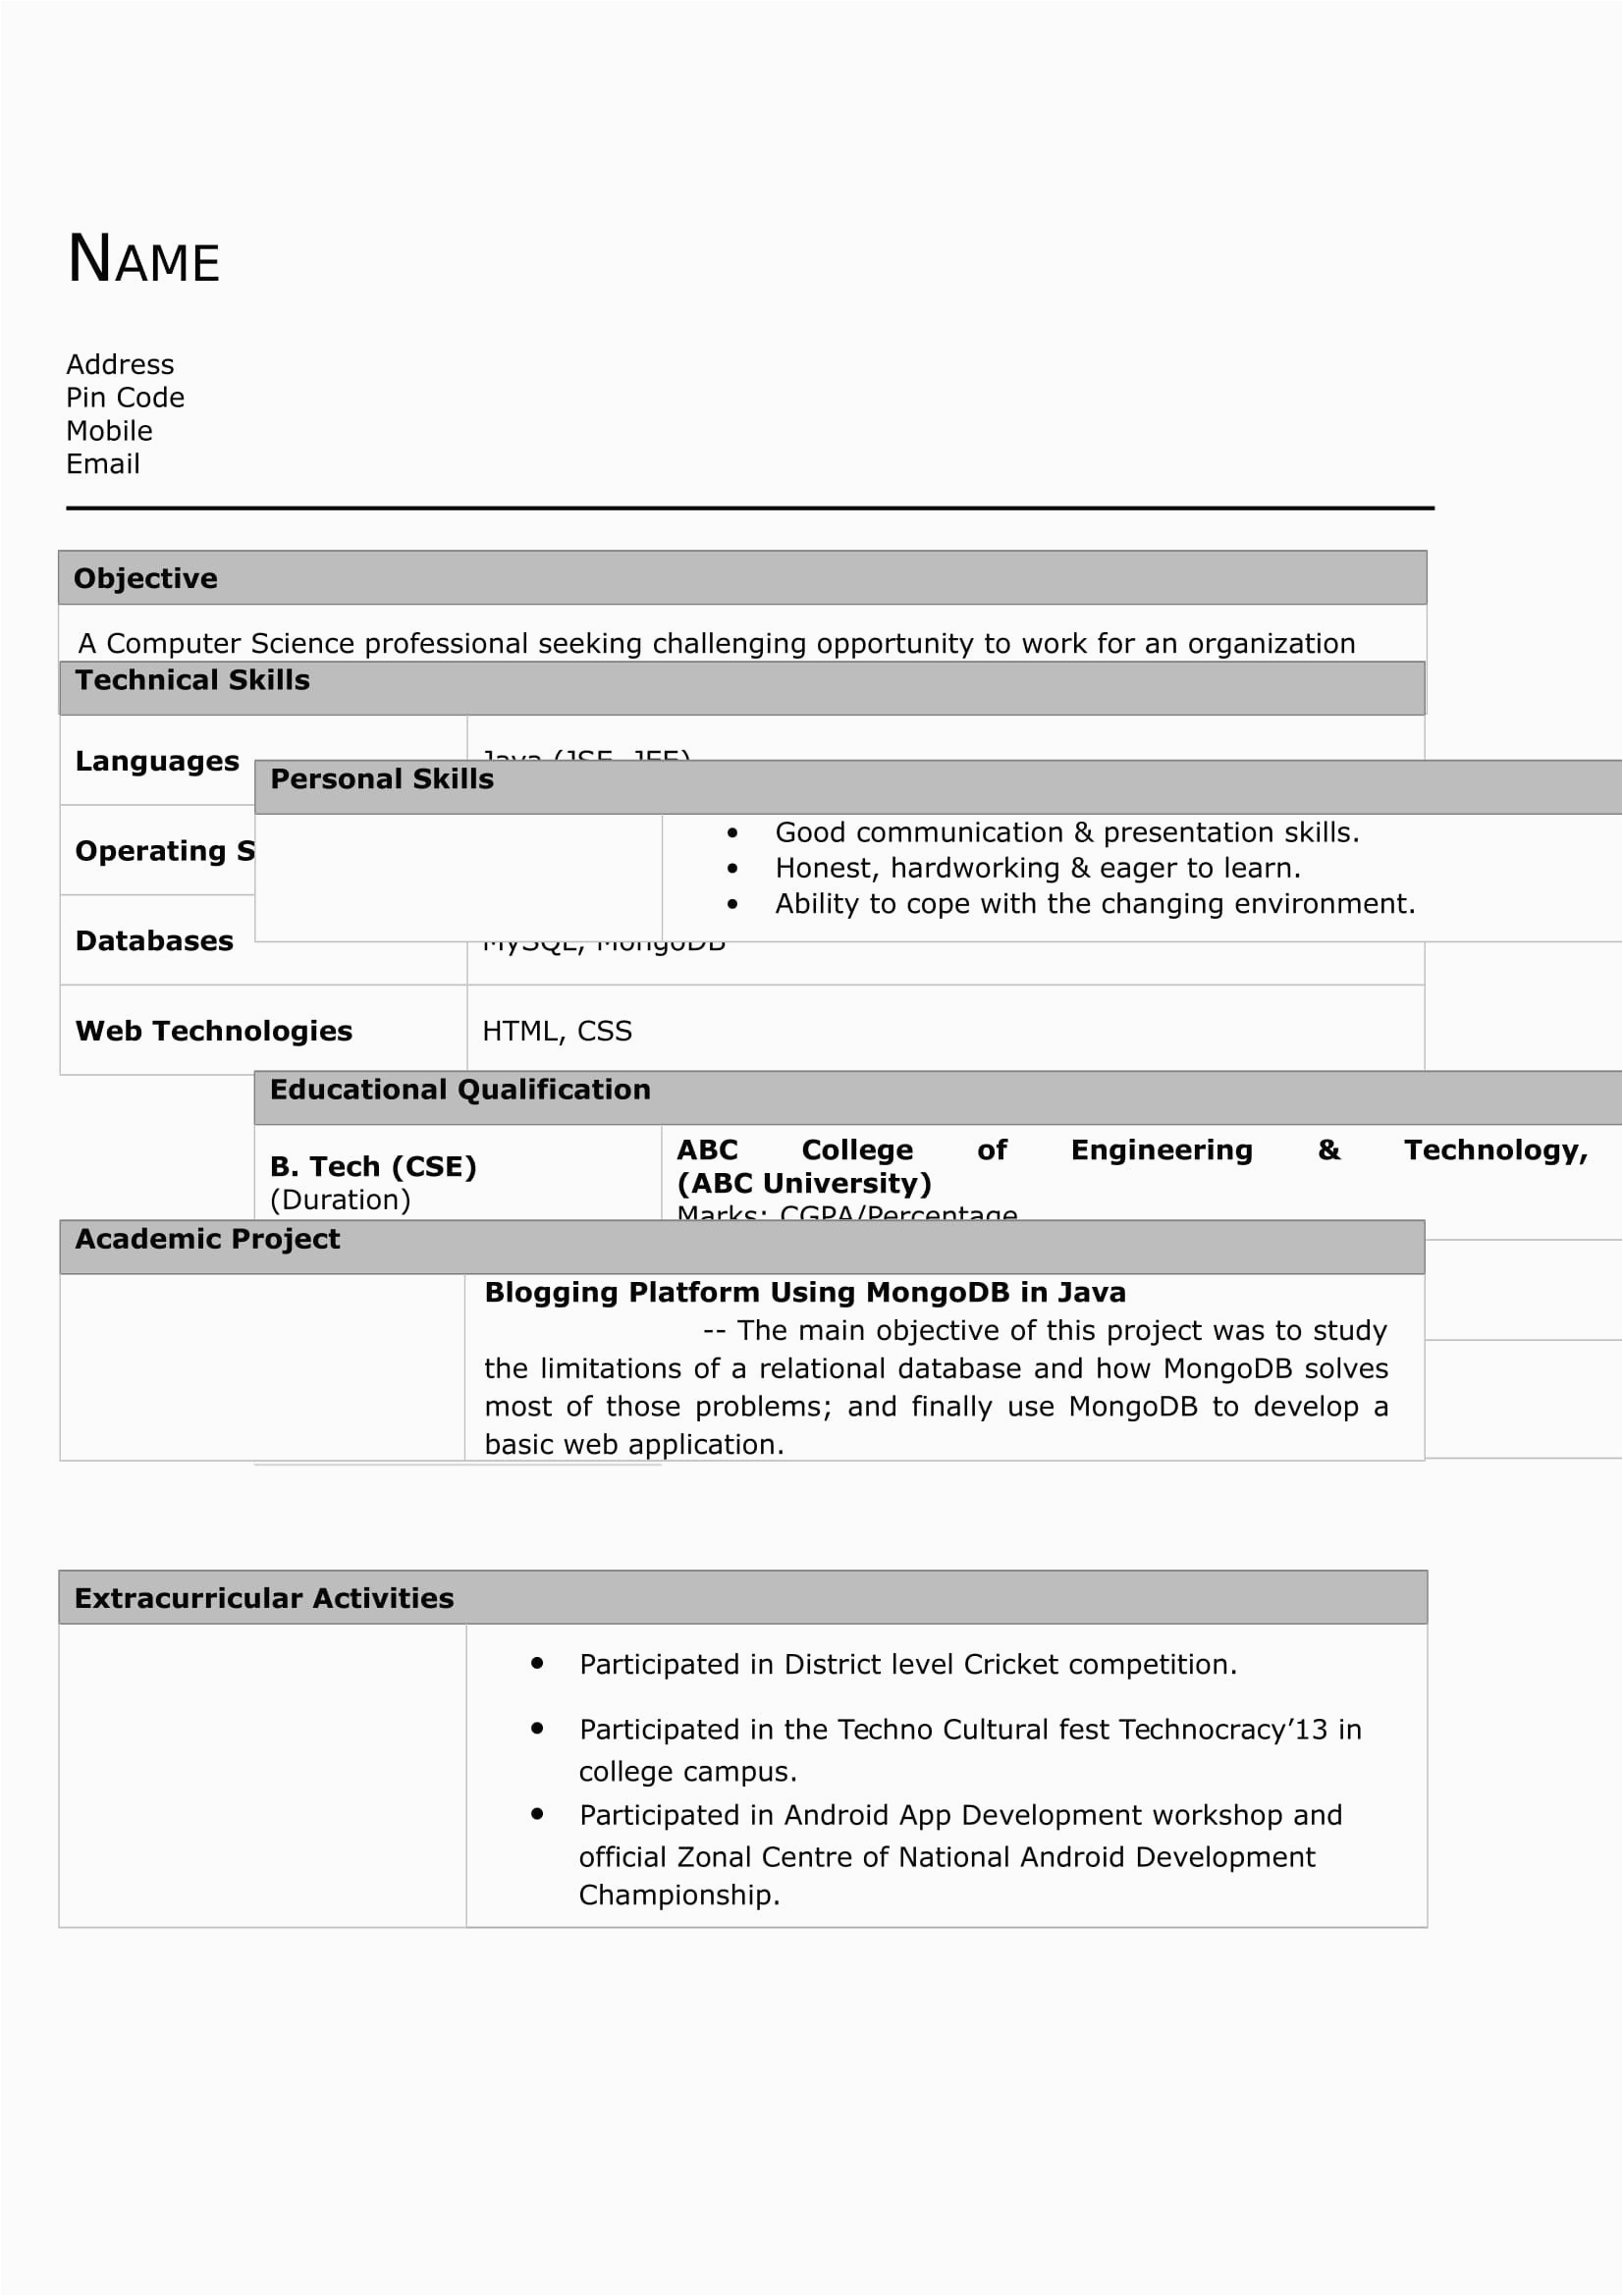 Resume Templates for Fresher software Engineer Resume Samples for Fresher Puter Engineer Good Resume